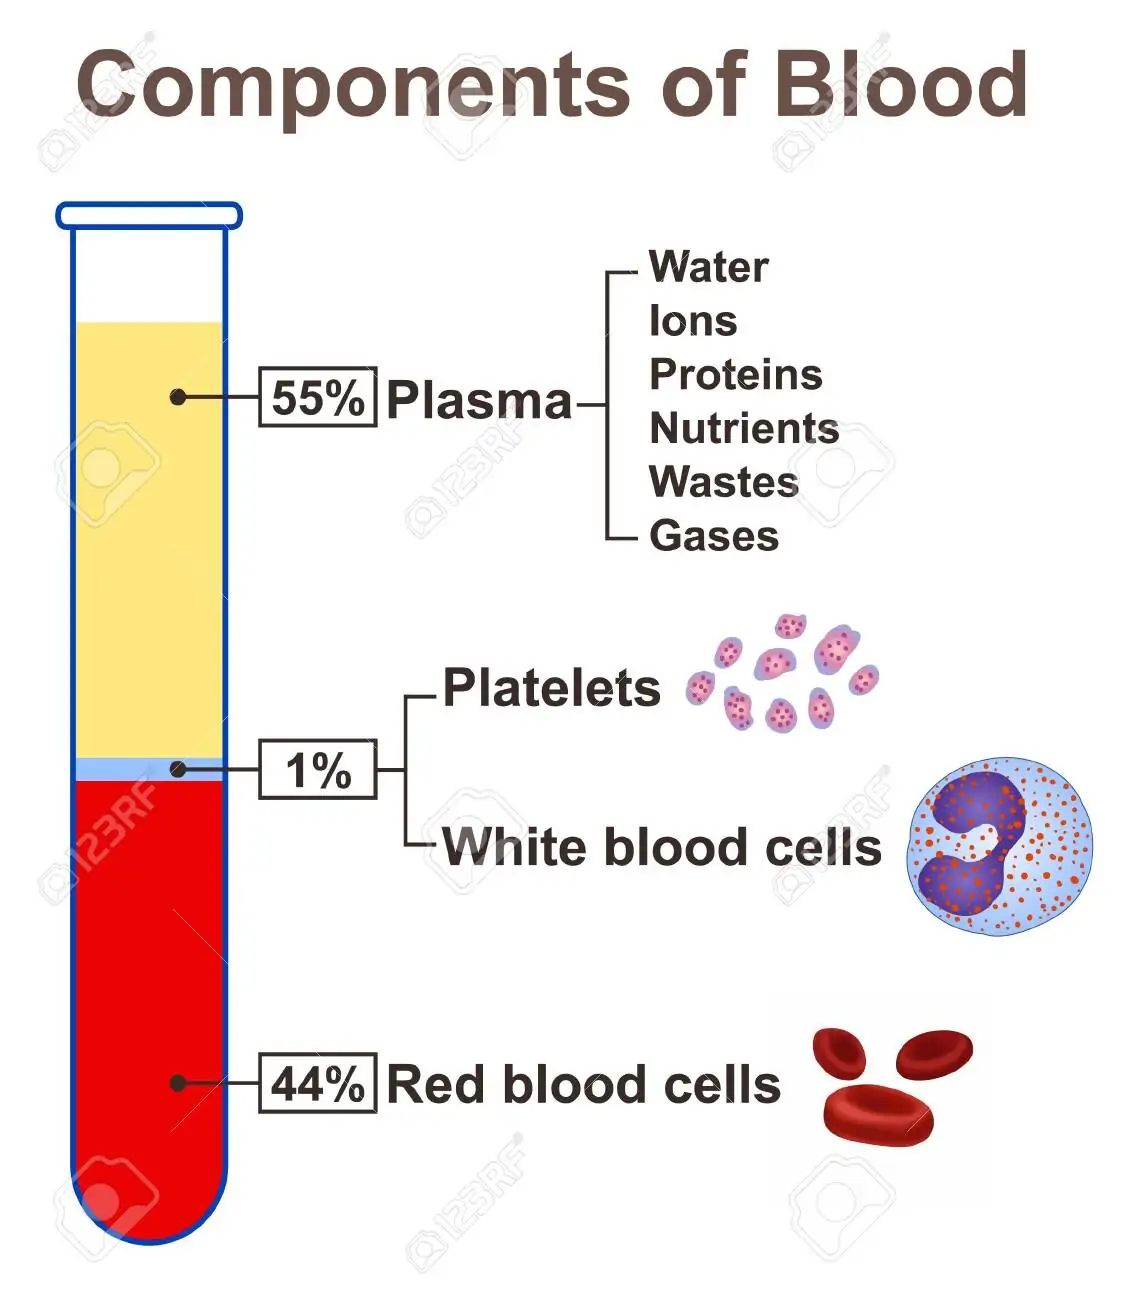 Components Of Blood Royalty Free Cliparts, Vectors, And Stock Illustration.  Image 127327901.